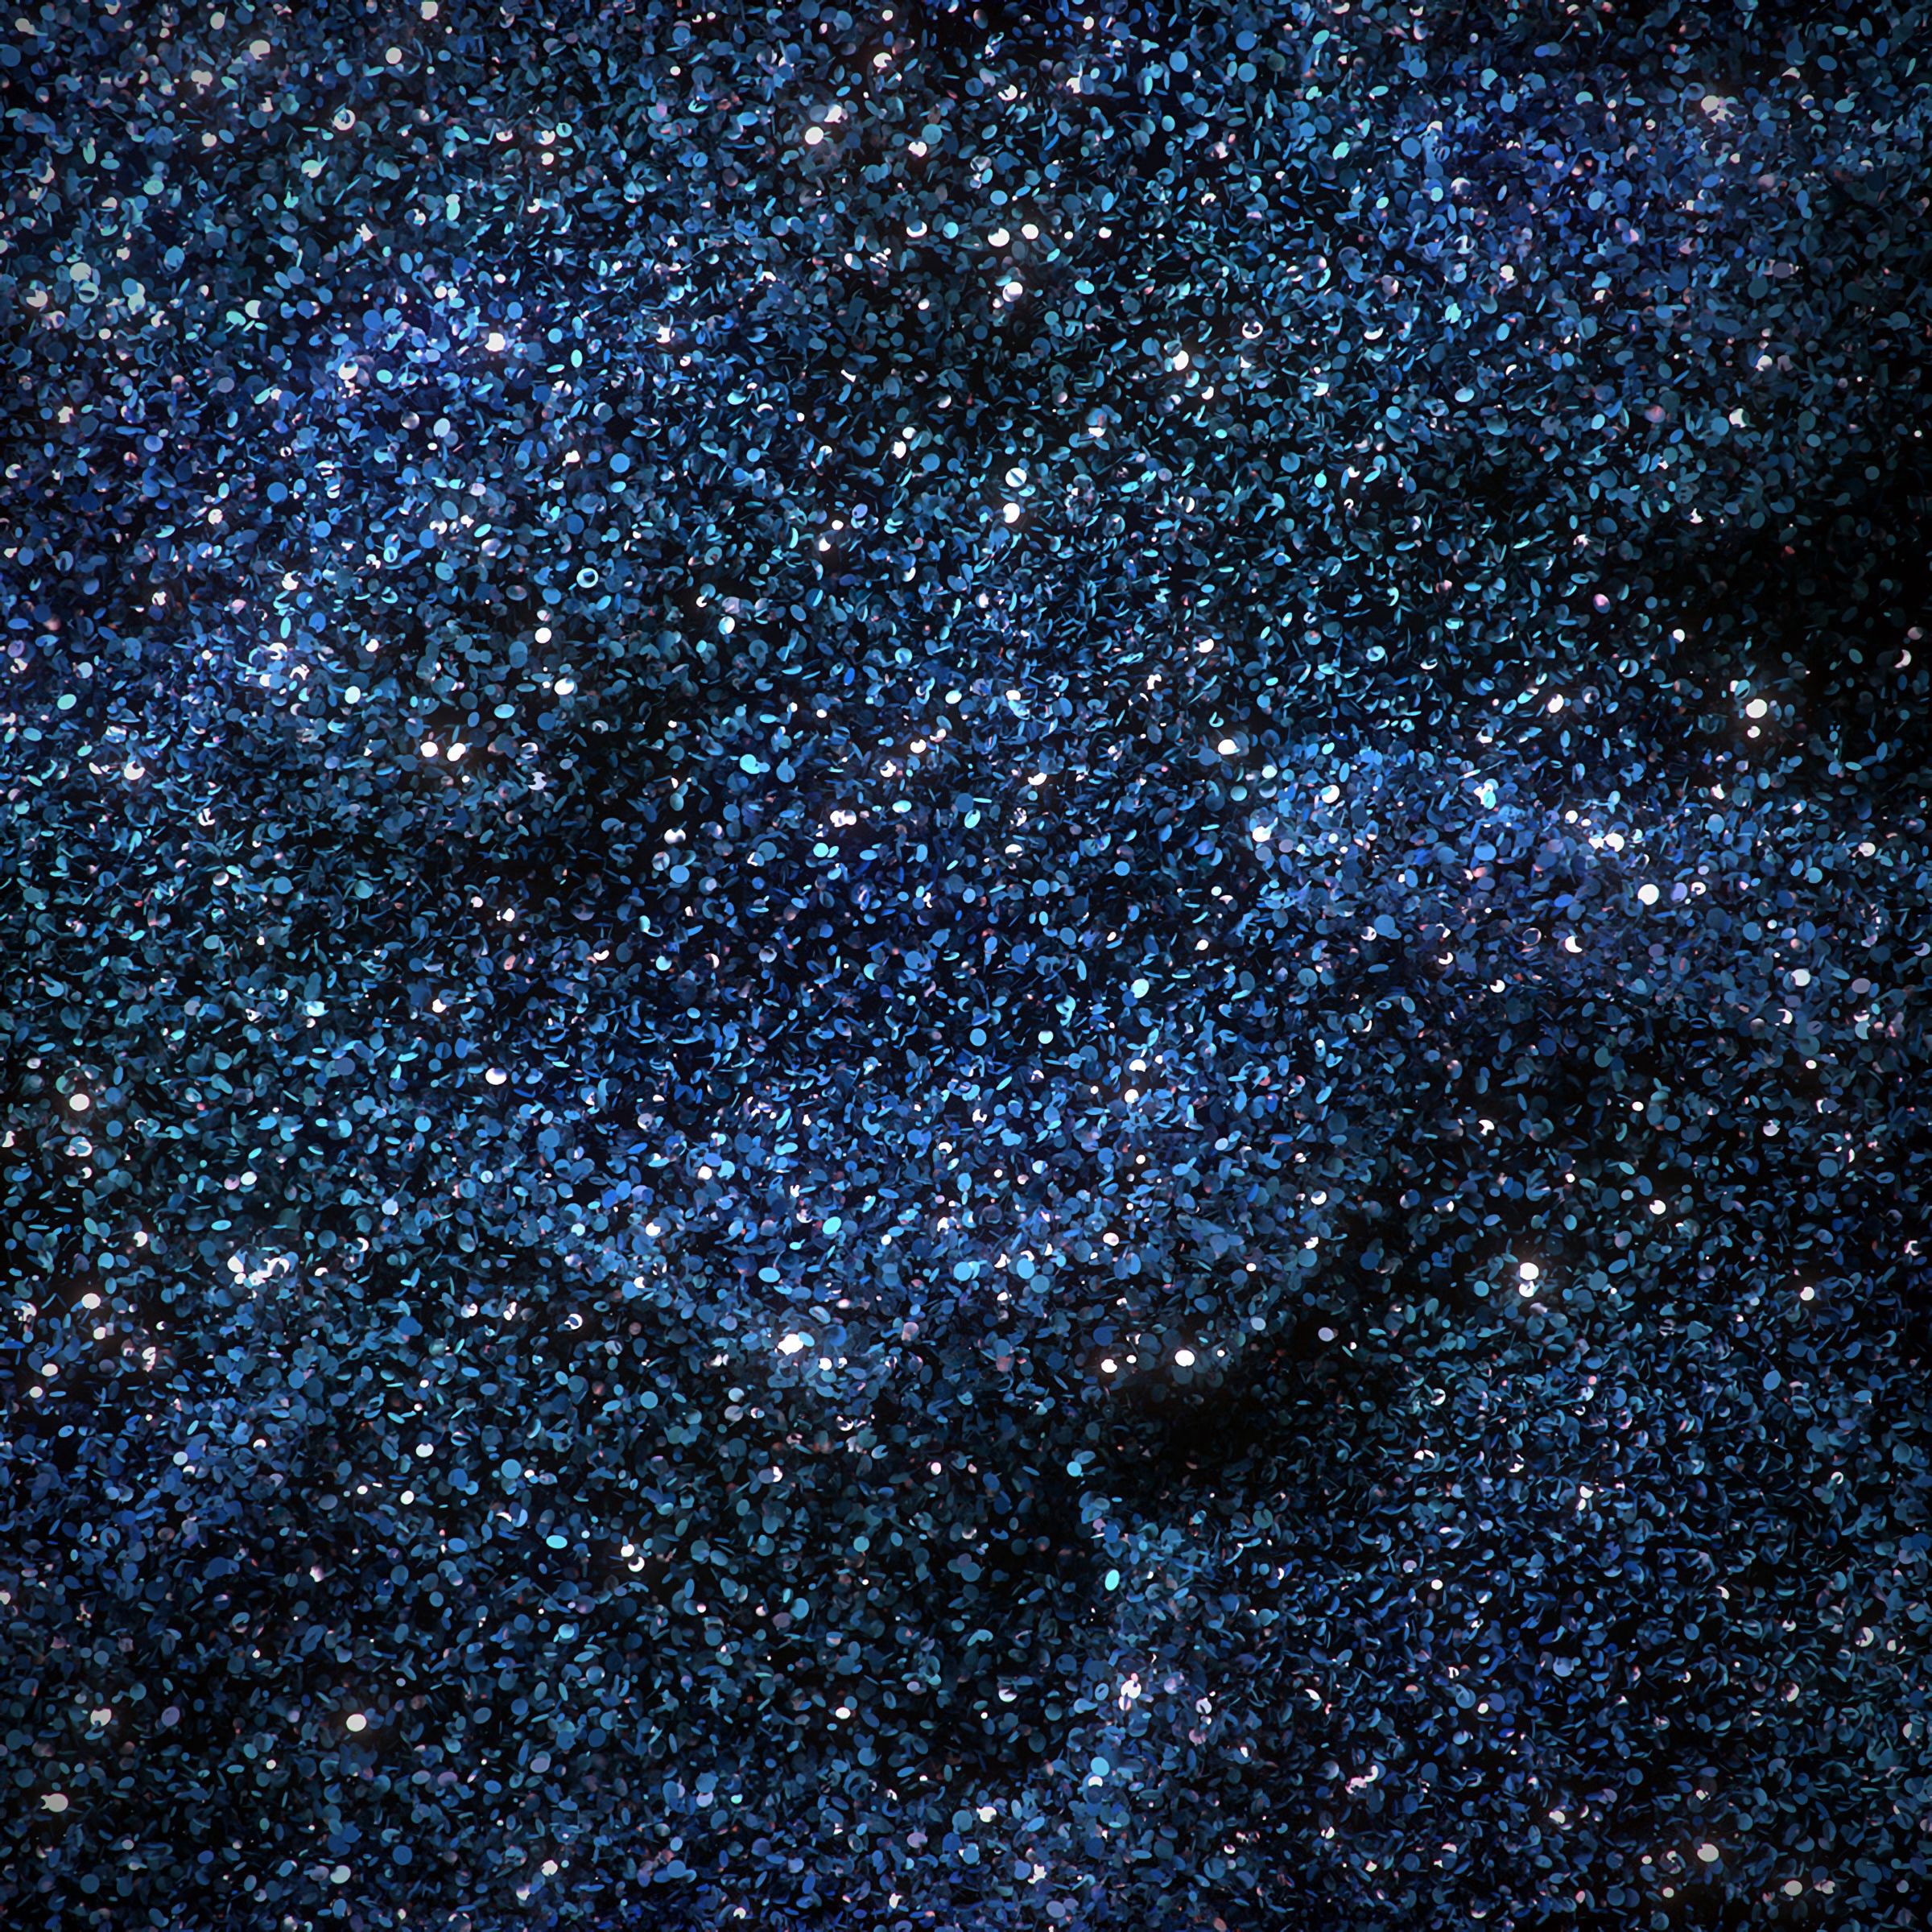 94614 download wallpaper blue, shine, texture, textures, brilliance, tinsel, sequins screensavers and pictures for free